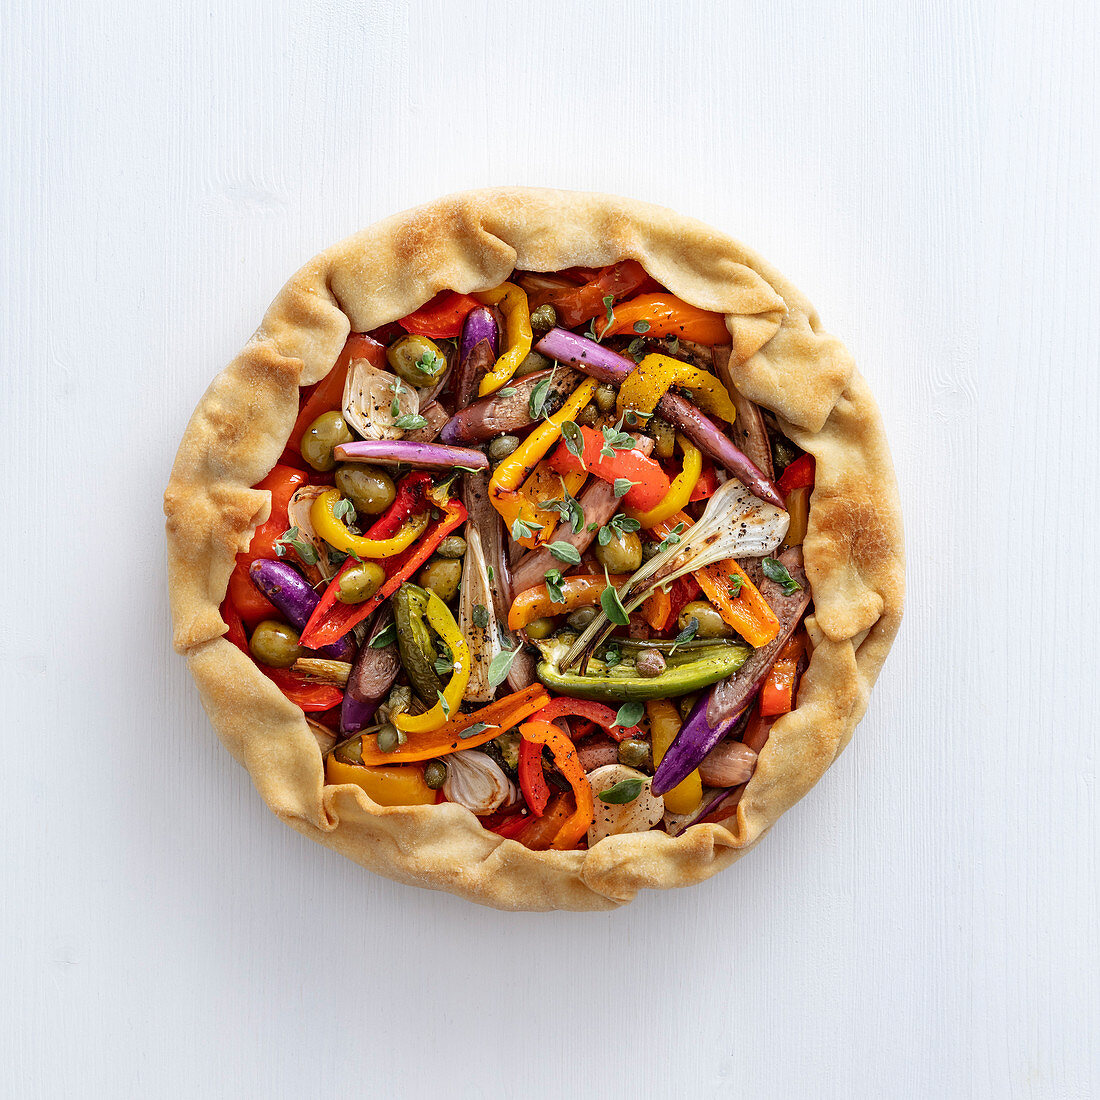 Vegetable tart with olives and capers